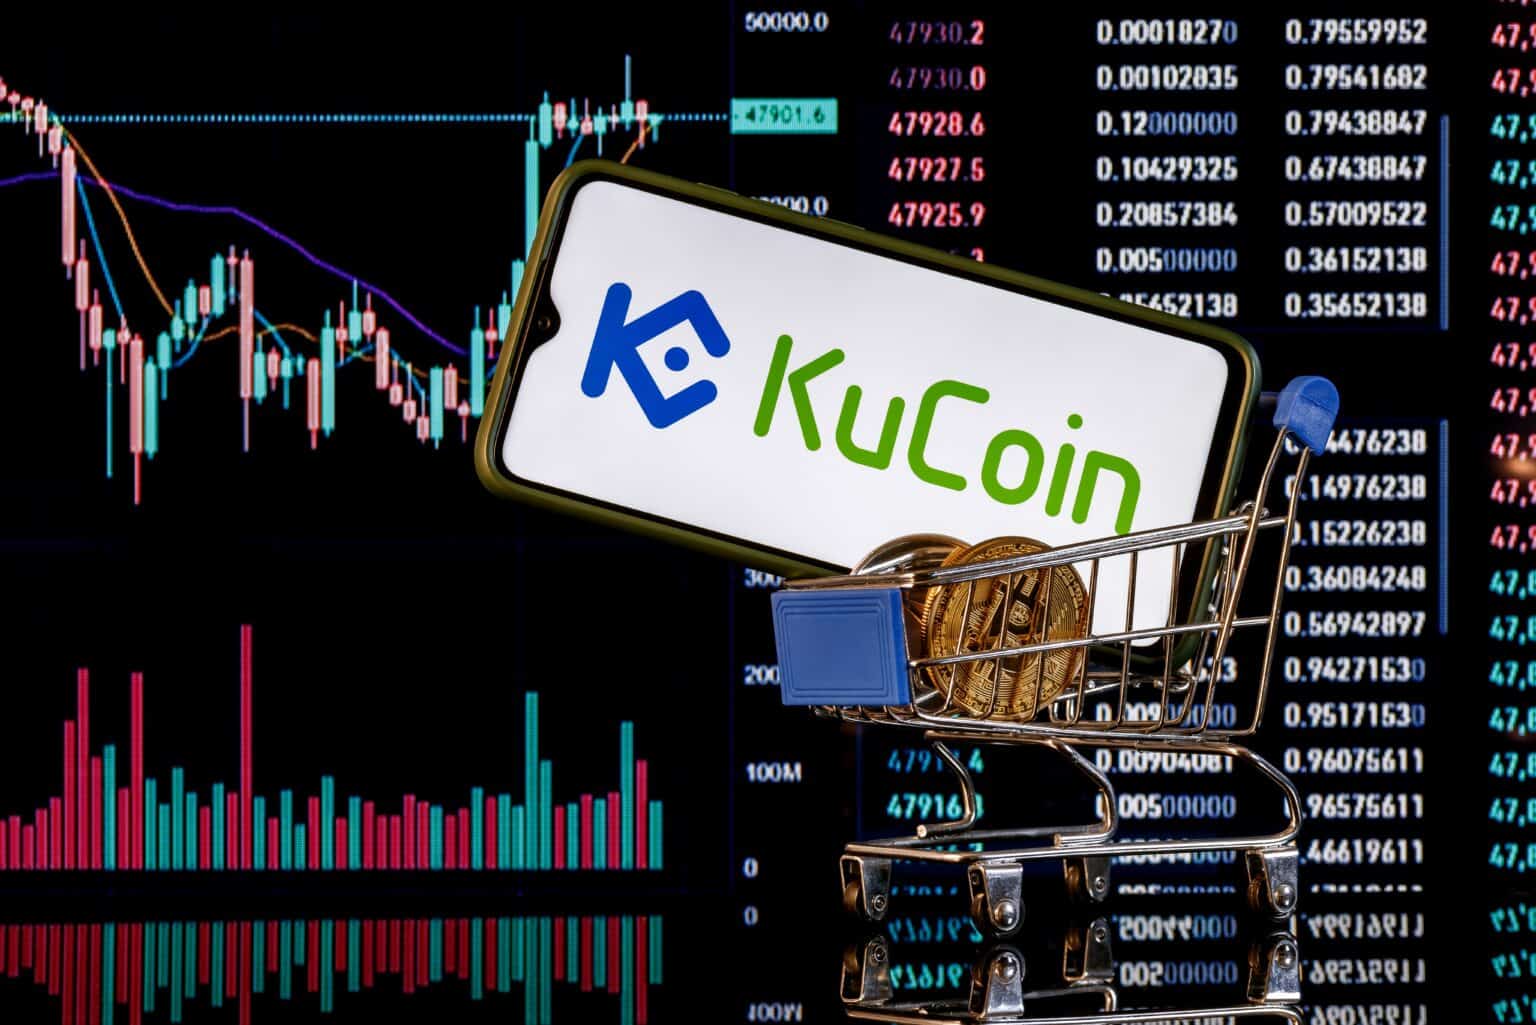 kucoin invenstment in the next days